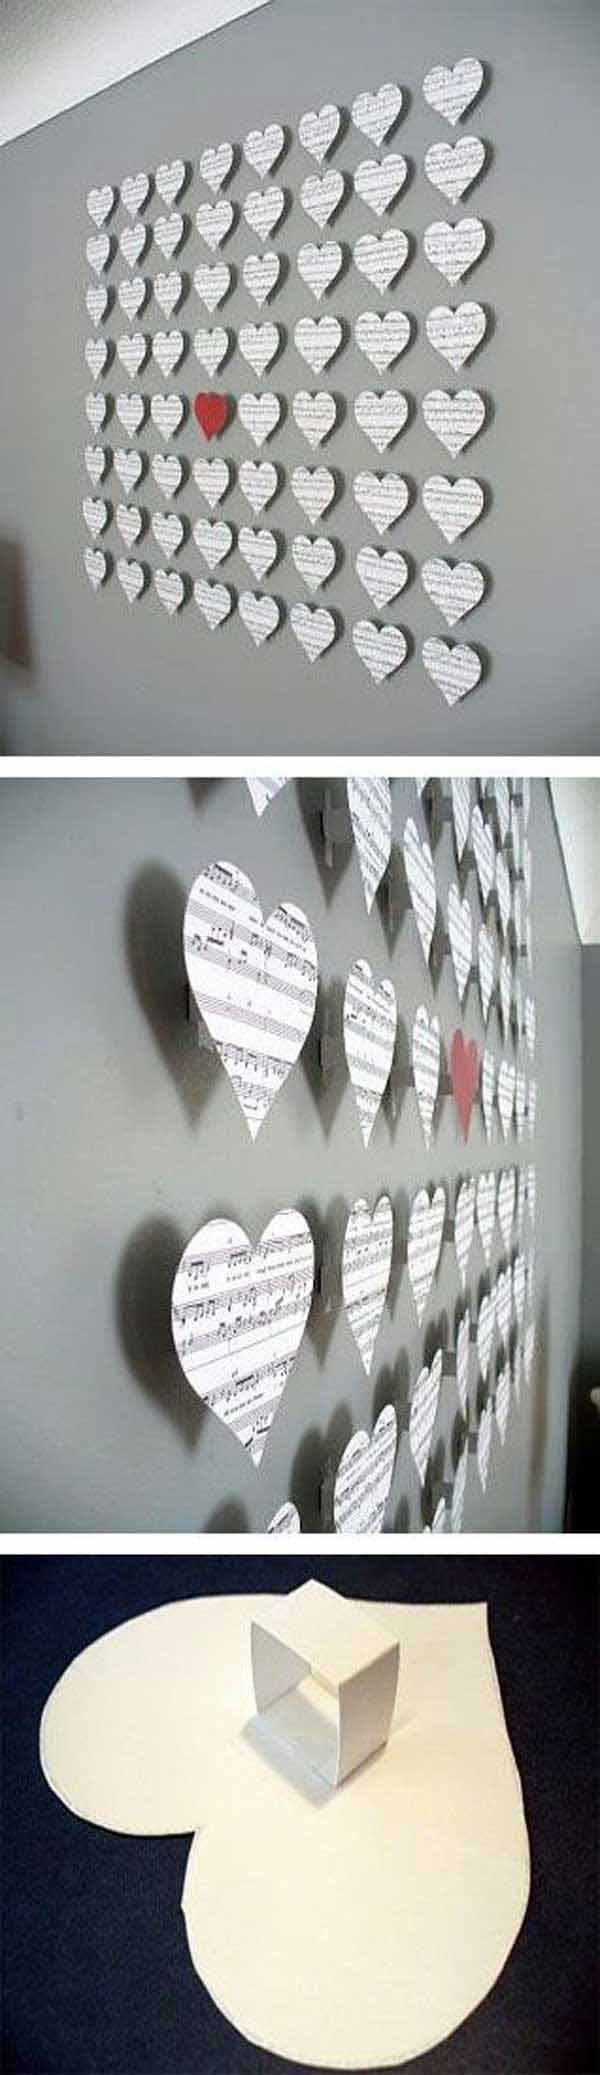 Wall Decors DIY
 26 DIY Cool And No Money Decorating Ideas for Your Wall